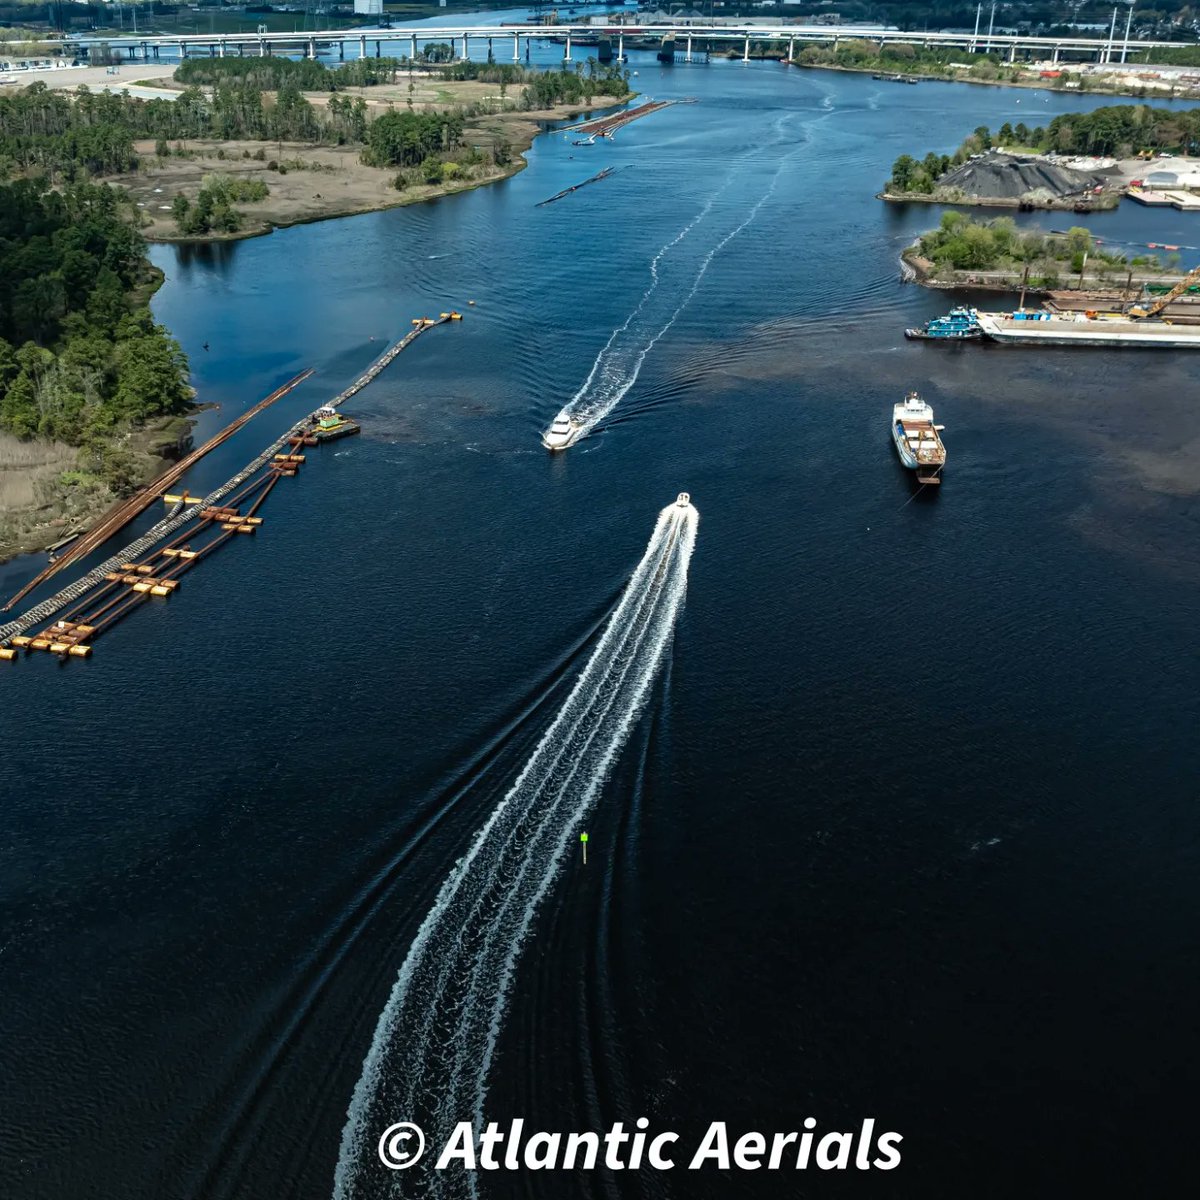 Just Send It!!!   Sneak Peek from yesterday's adventures

@visitvirginia #onlyinvirginia #seenfromadrone #fromwhereidrone #drone #drones #dronephotography #boats #intercostal